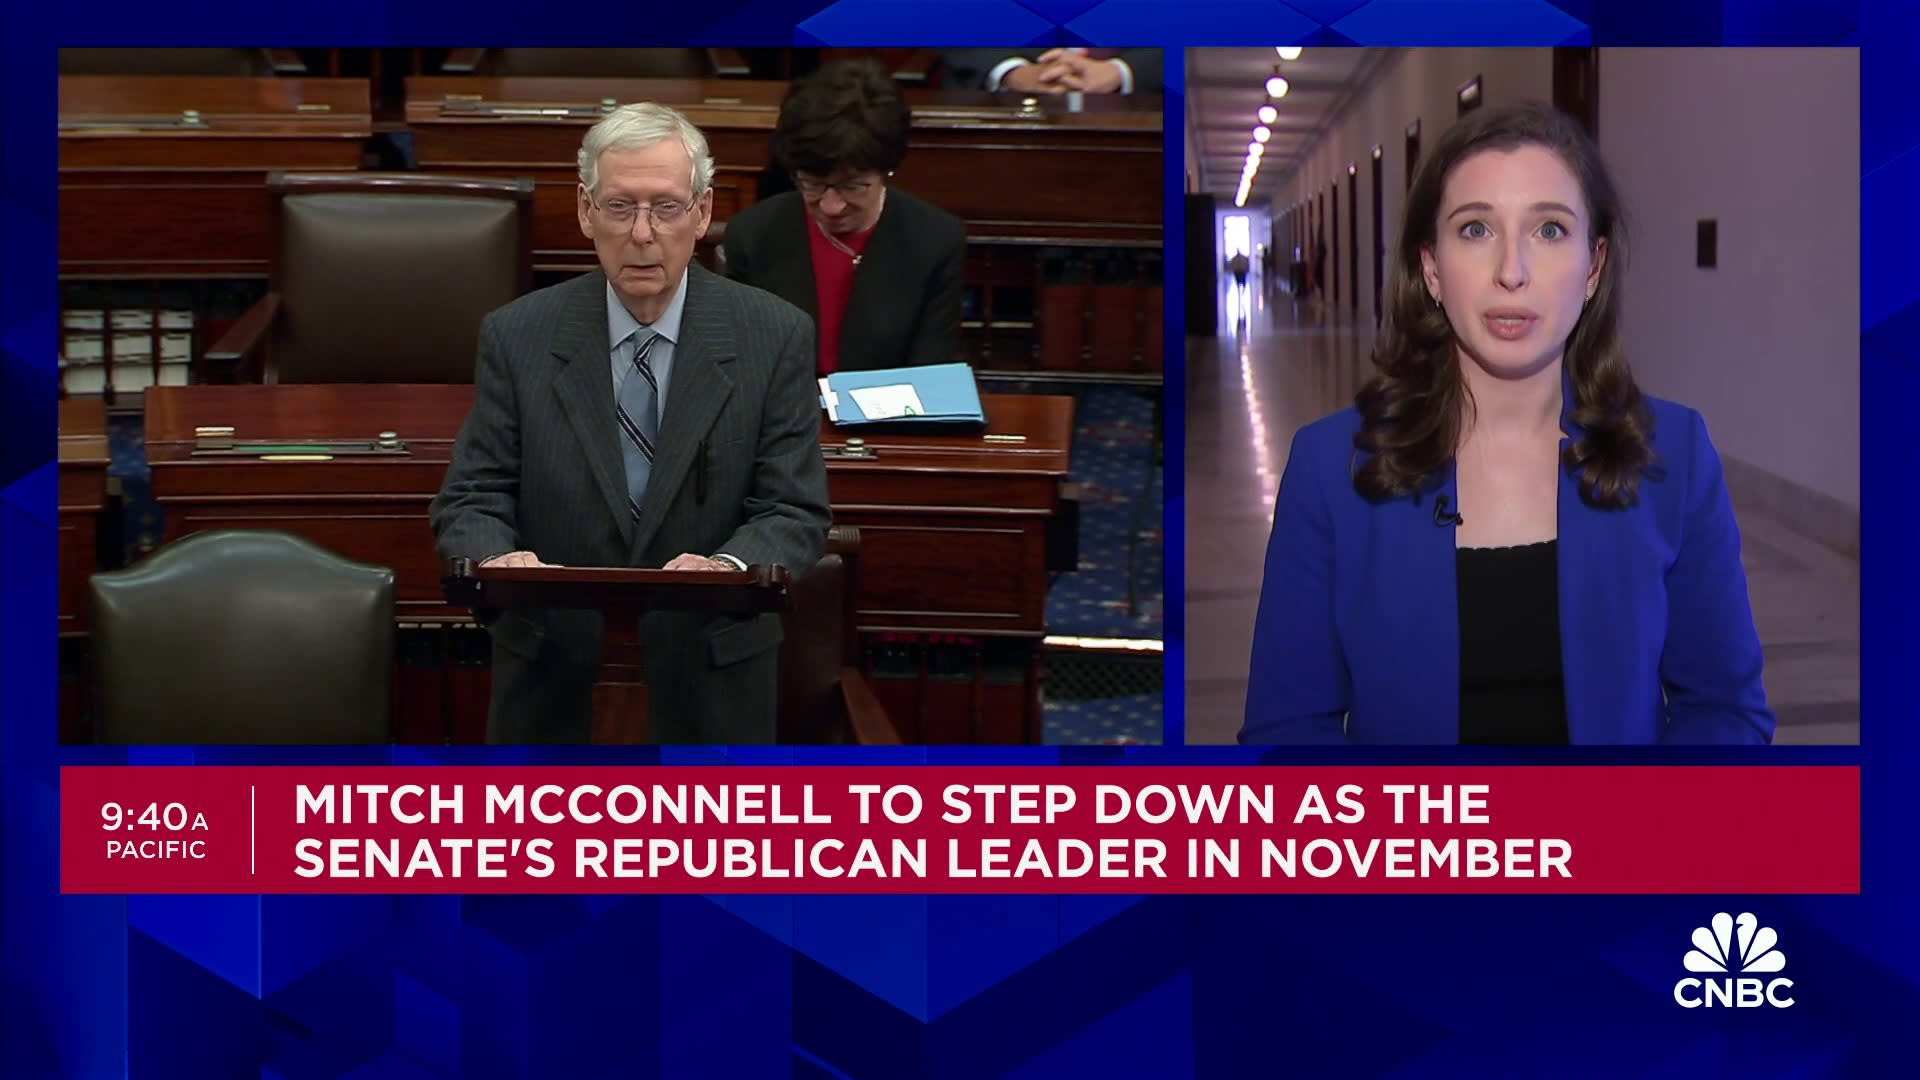 Photo of Mitch McConnell to step down as Republican Senate leader: Here's what you need to know